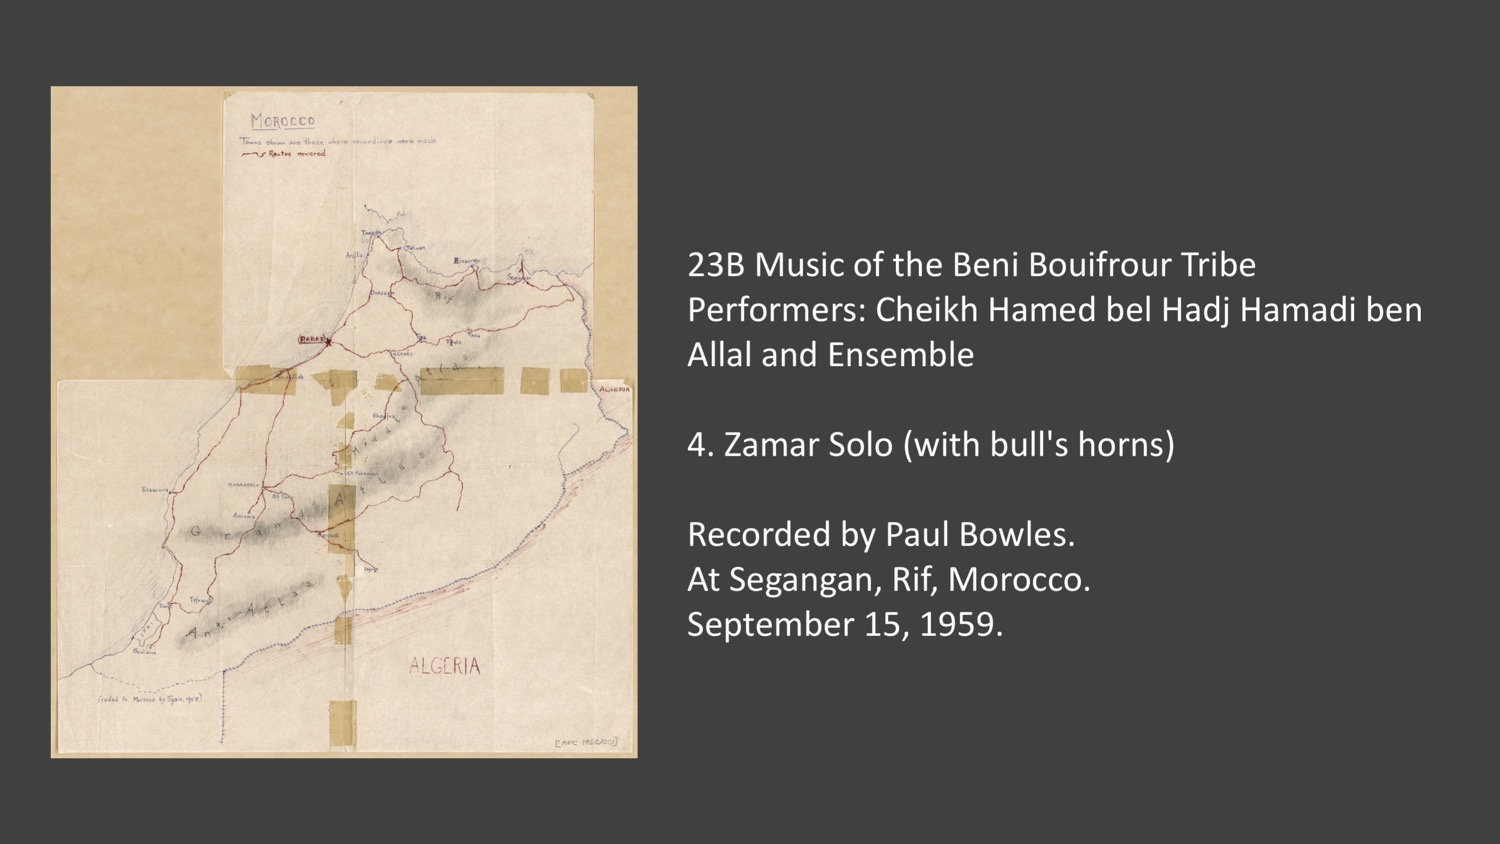 23B 4 Zamar Solo (with bull's horns)
Music of the Beni Bouifrour Tribe
Performers: Cheikh Hamed bel Hadj Hamadi ben Allal and Ensemble
Recorded by Paul Bowles at Segangan, Rif, Morocco. September 15, 1959.